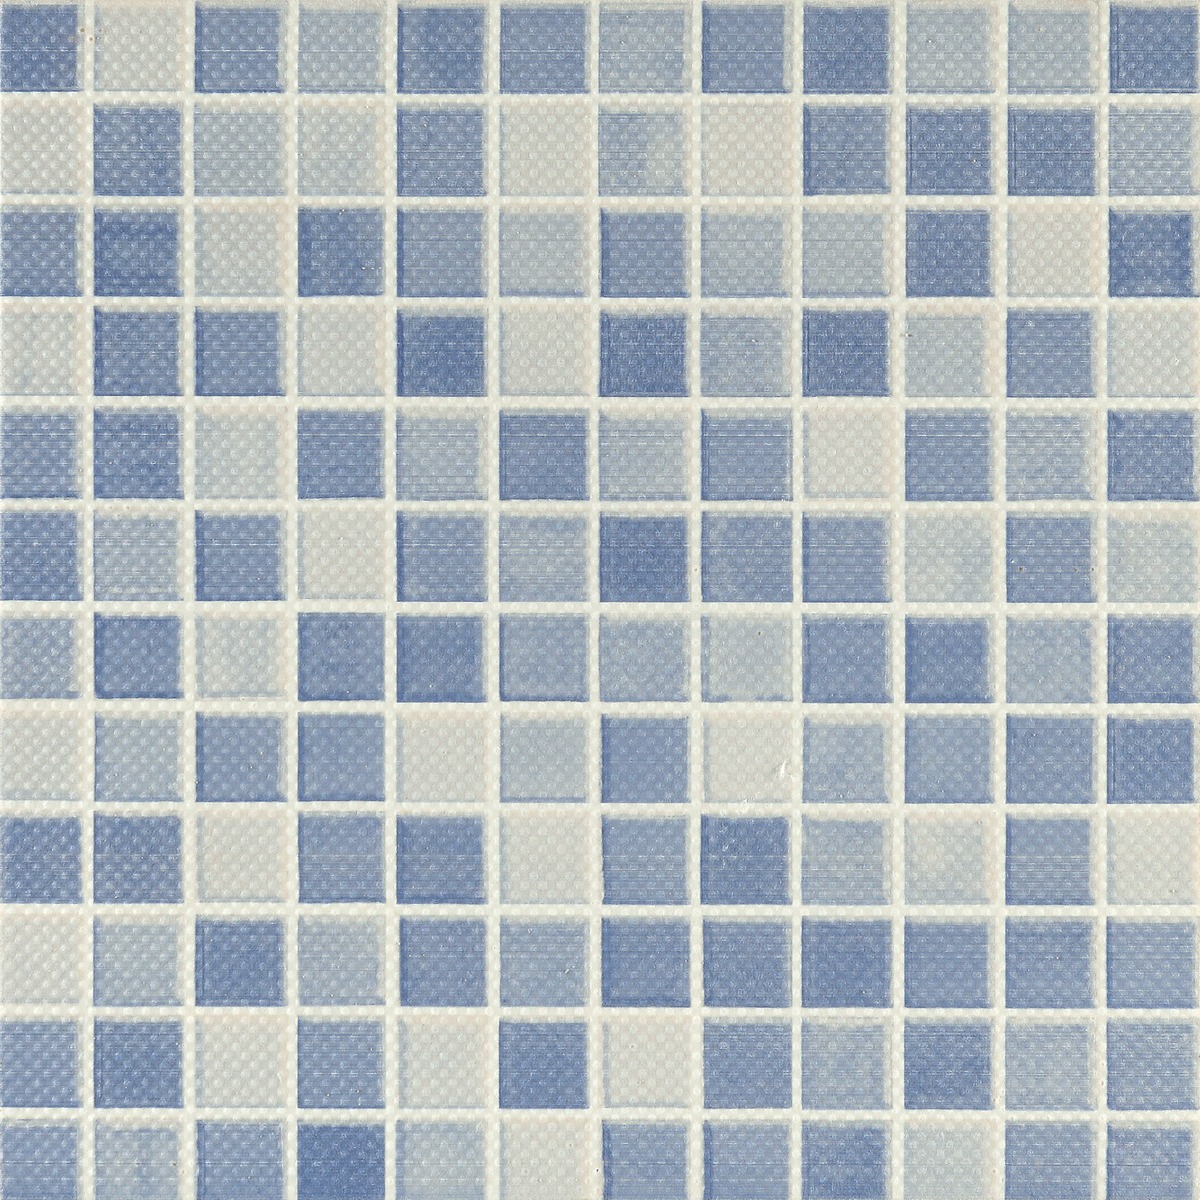 Swimming Pool Tiles for Accent Tiles